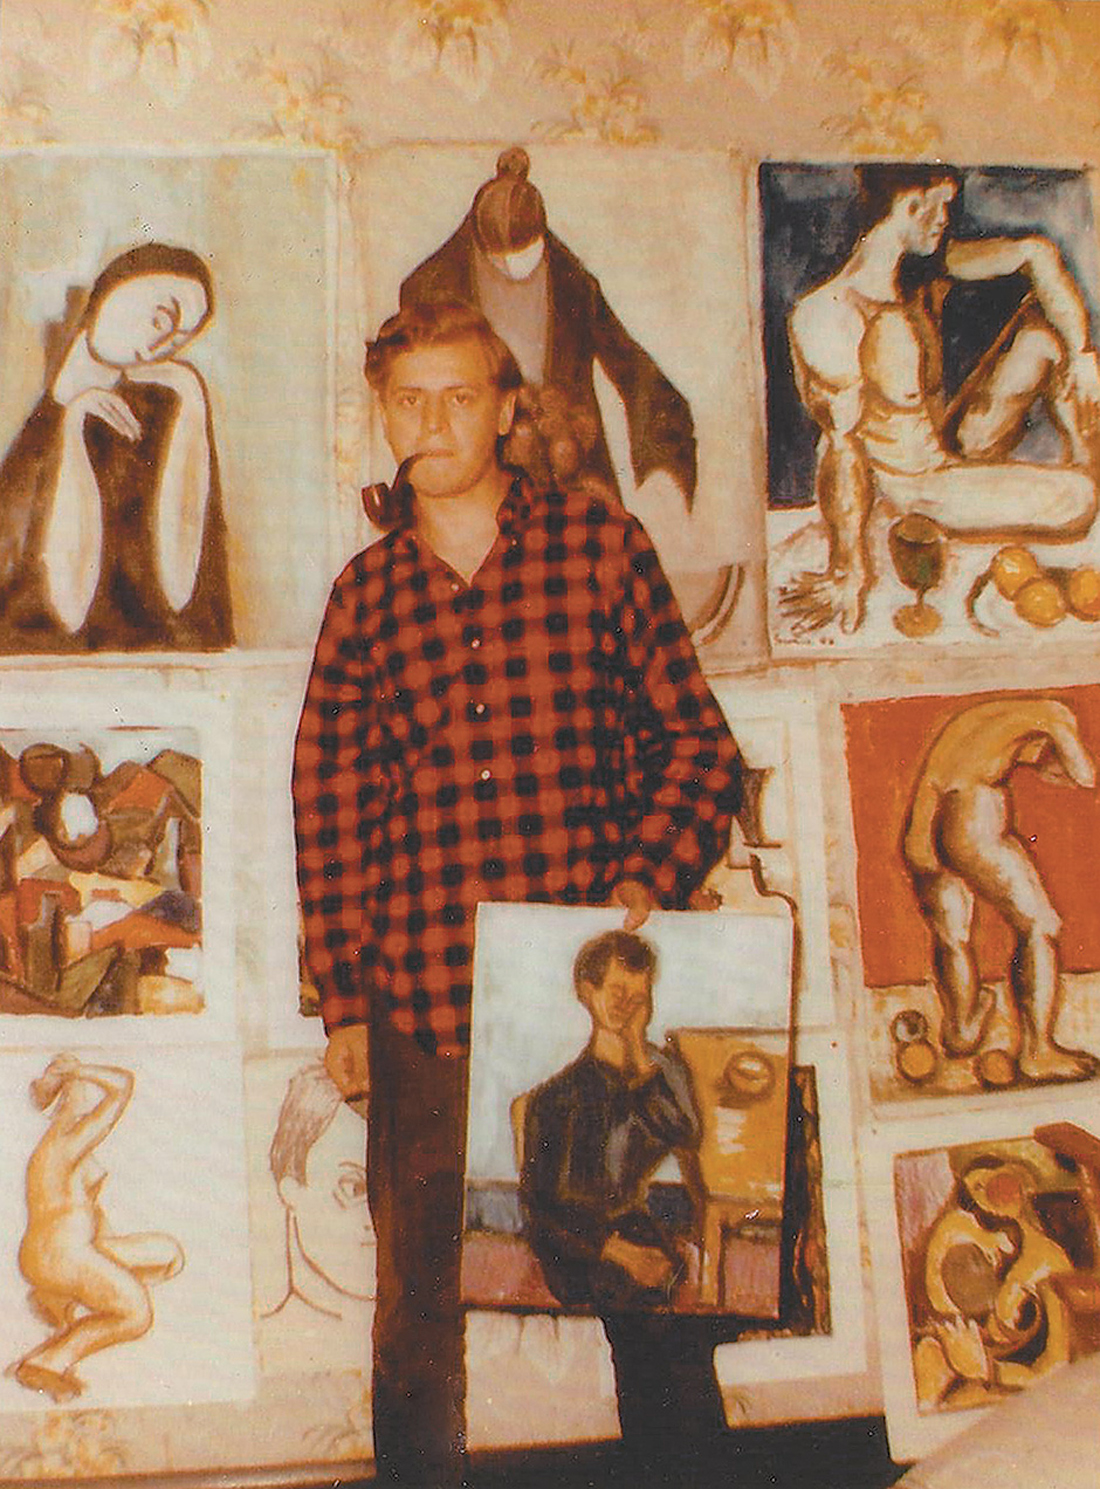 Charles Simic, age seventeen, with some of his paintings, Oak Park, Illinois, 1955